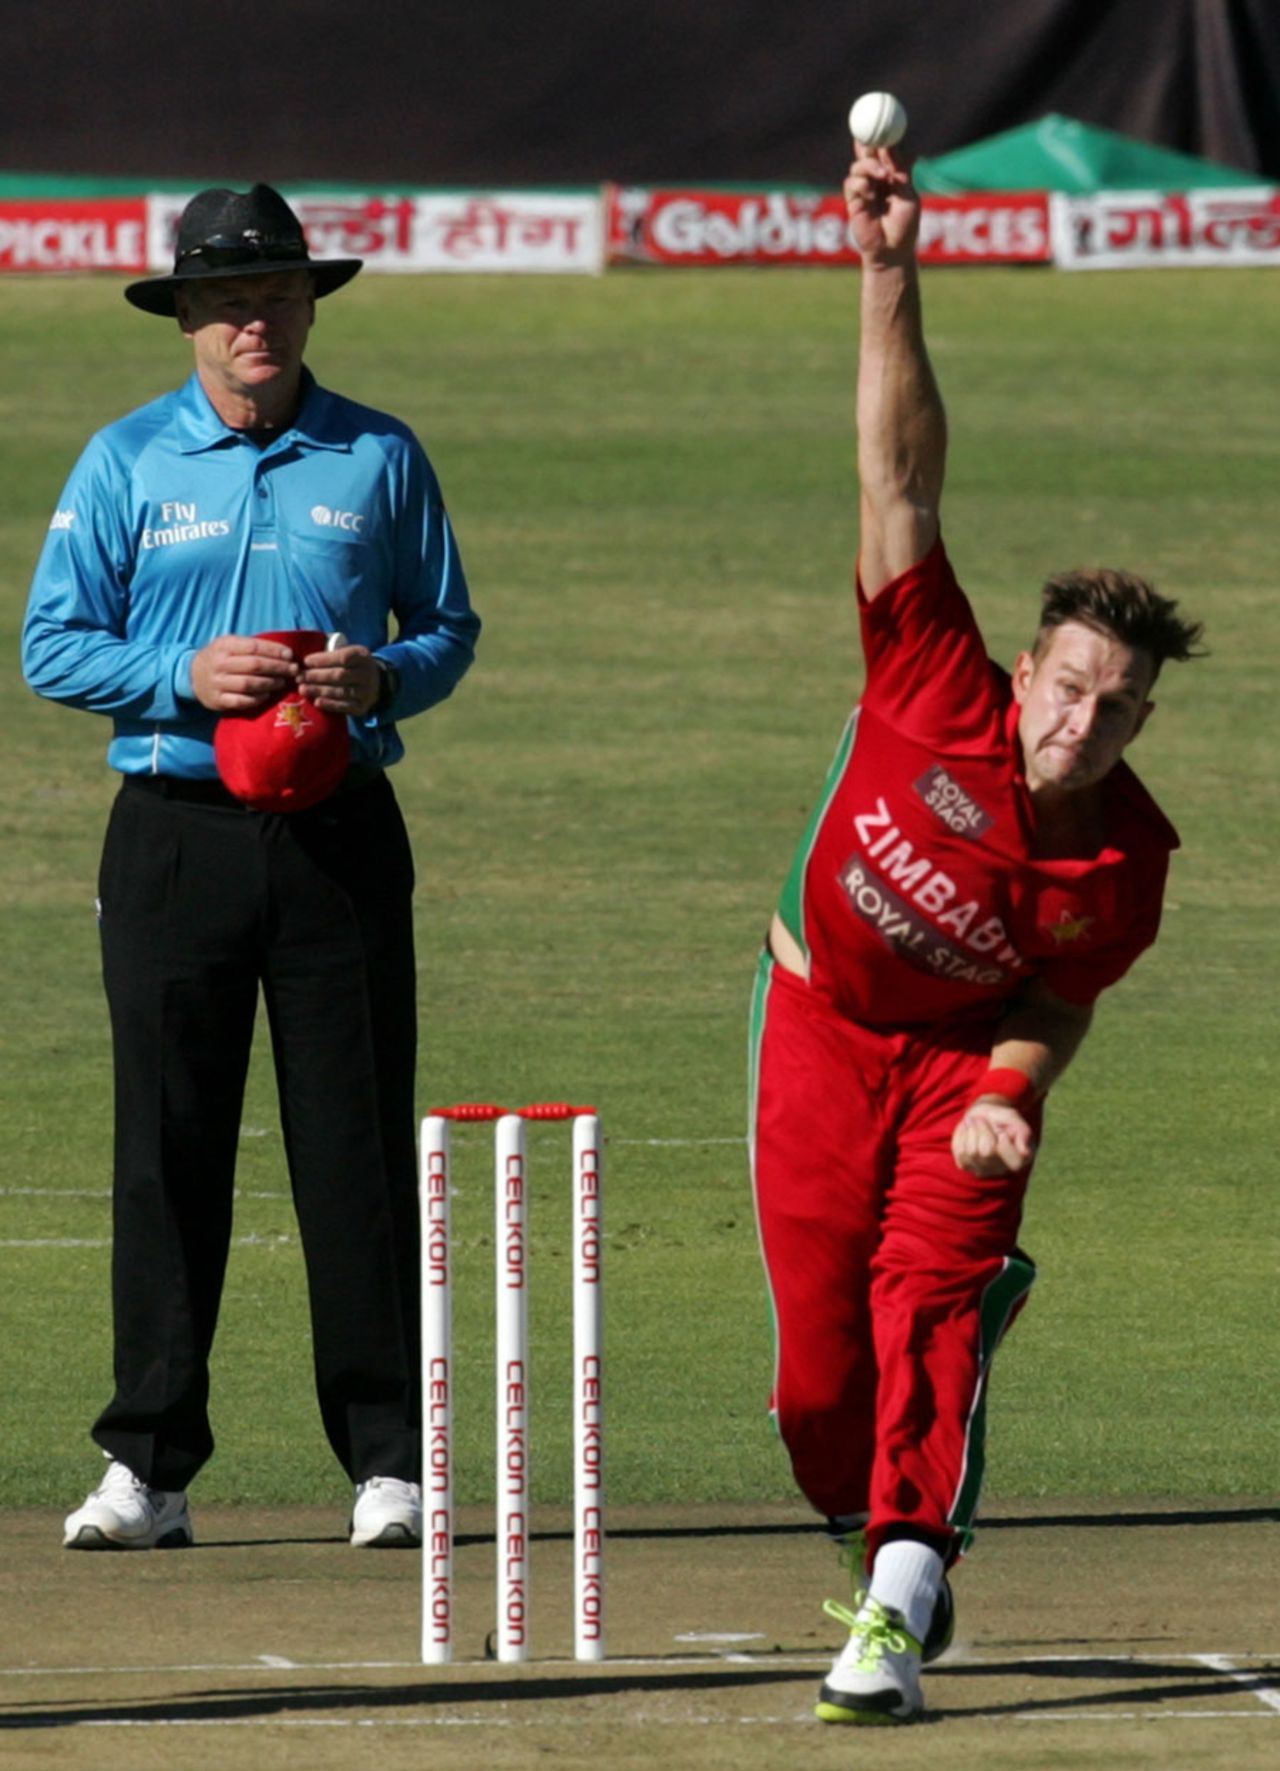 Kyle Jarvis in his delivery stride, Zimbabwe v India, 2nd ODI, Harare, July 26, 2013